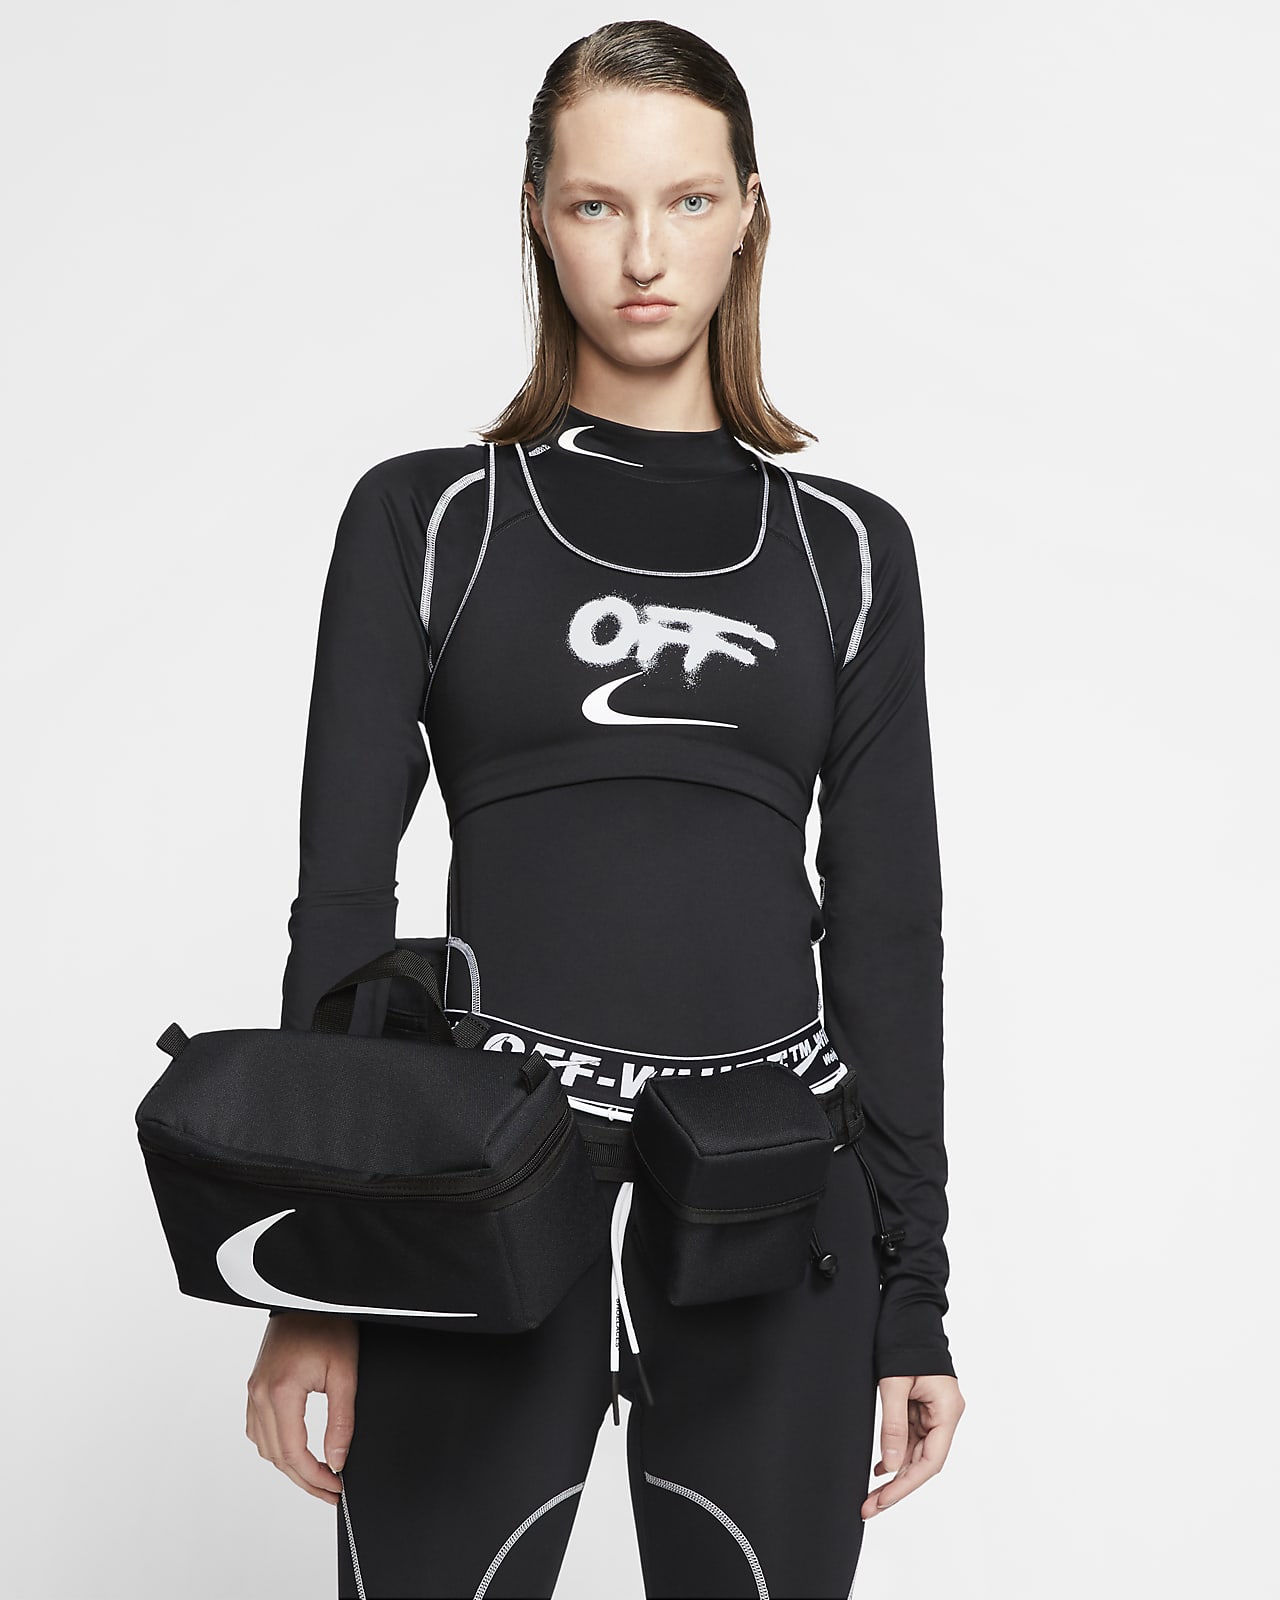 nike off white fanny pack